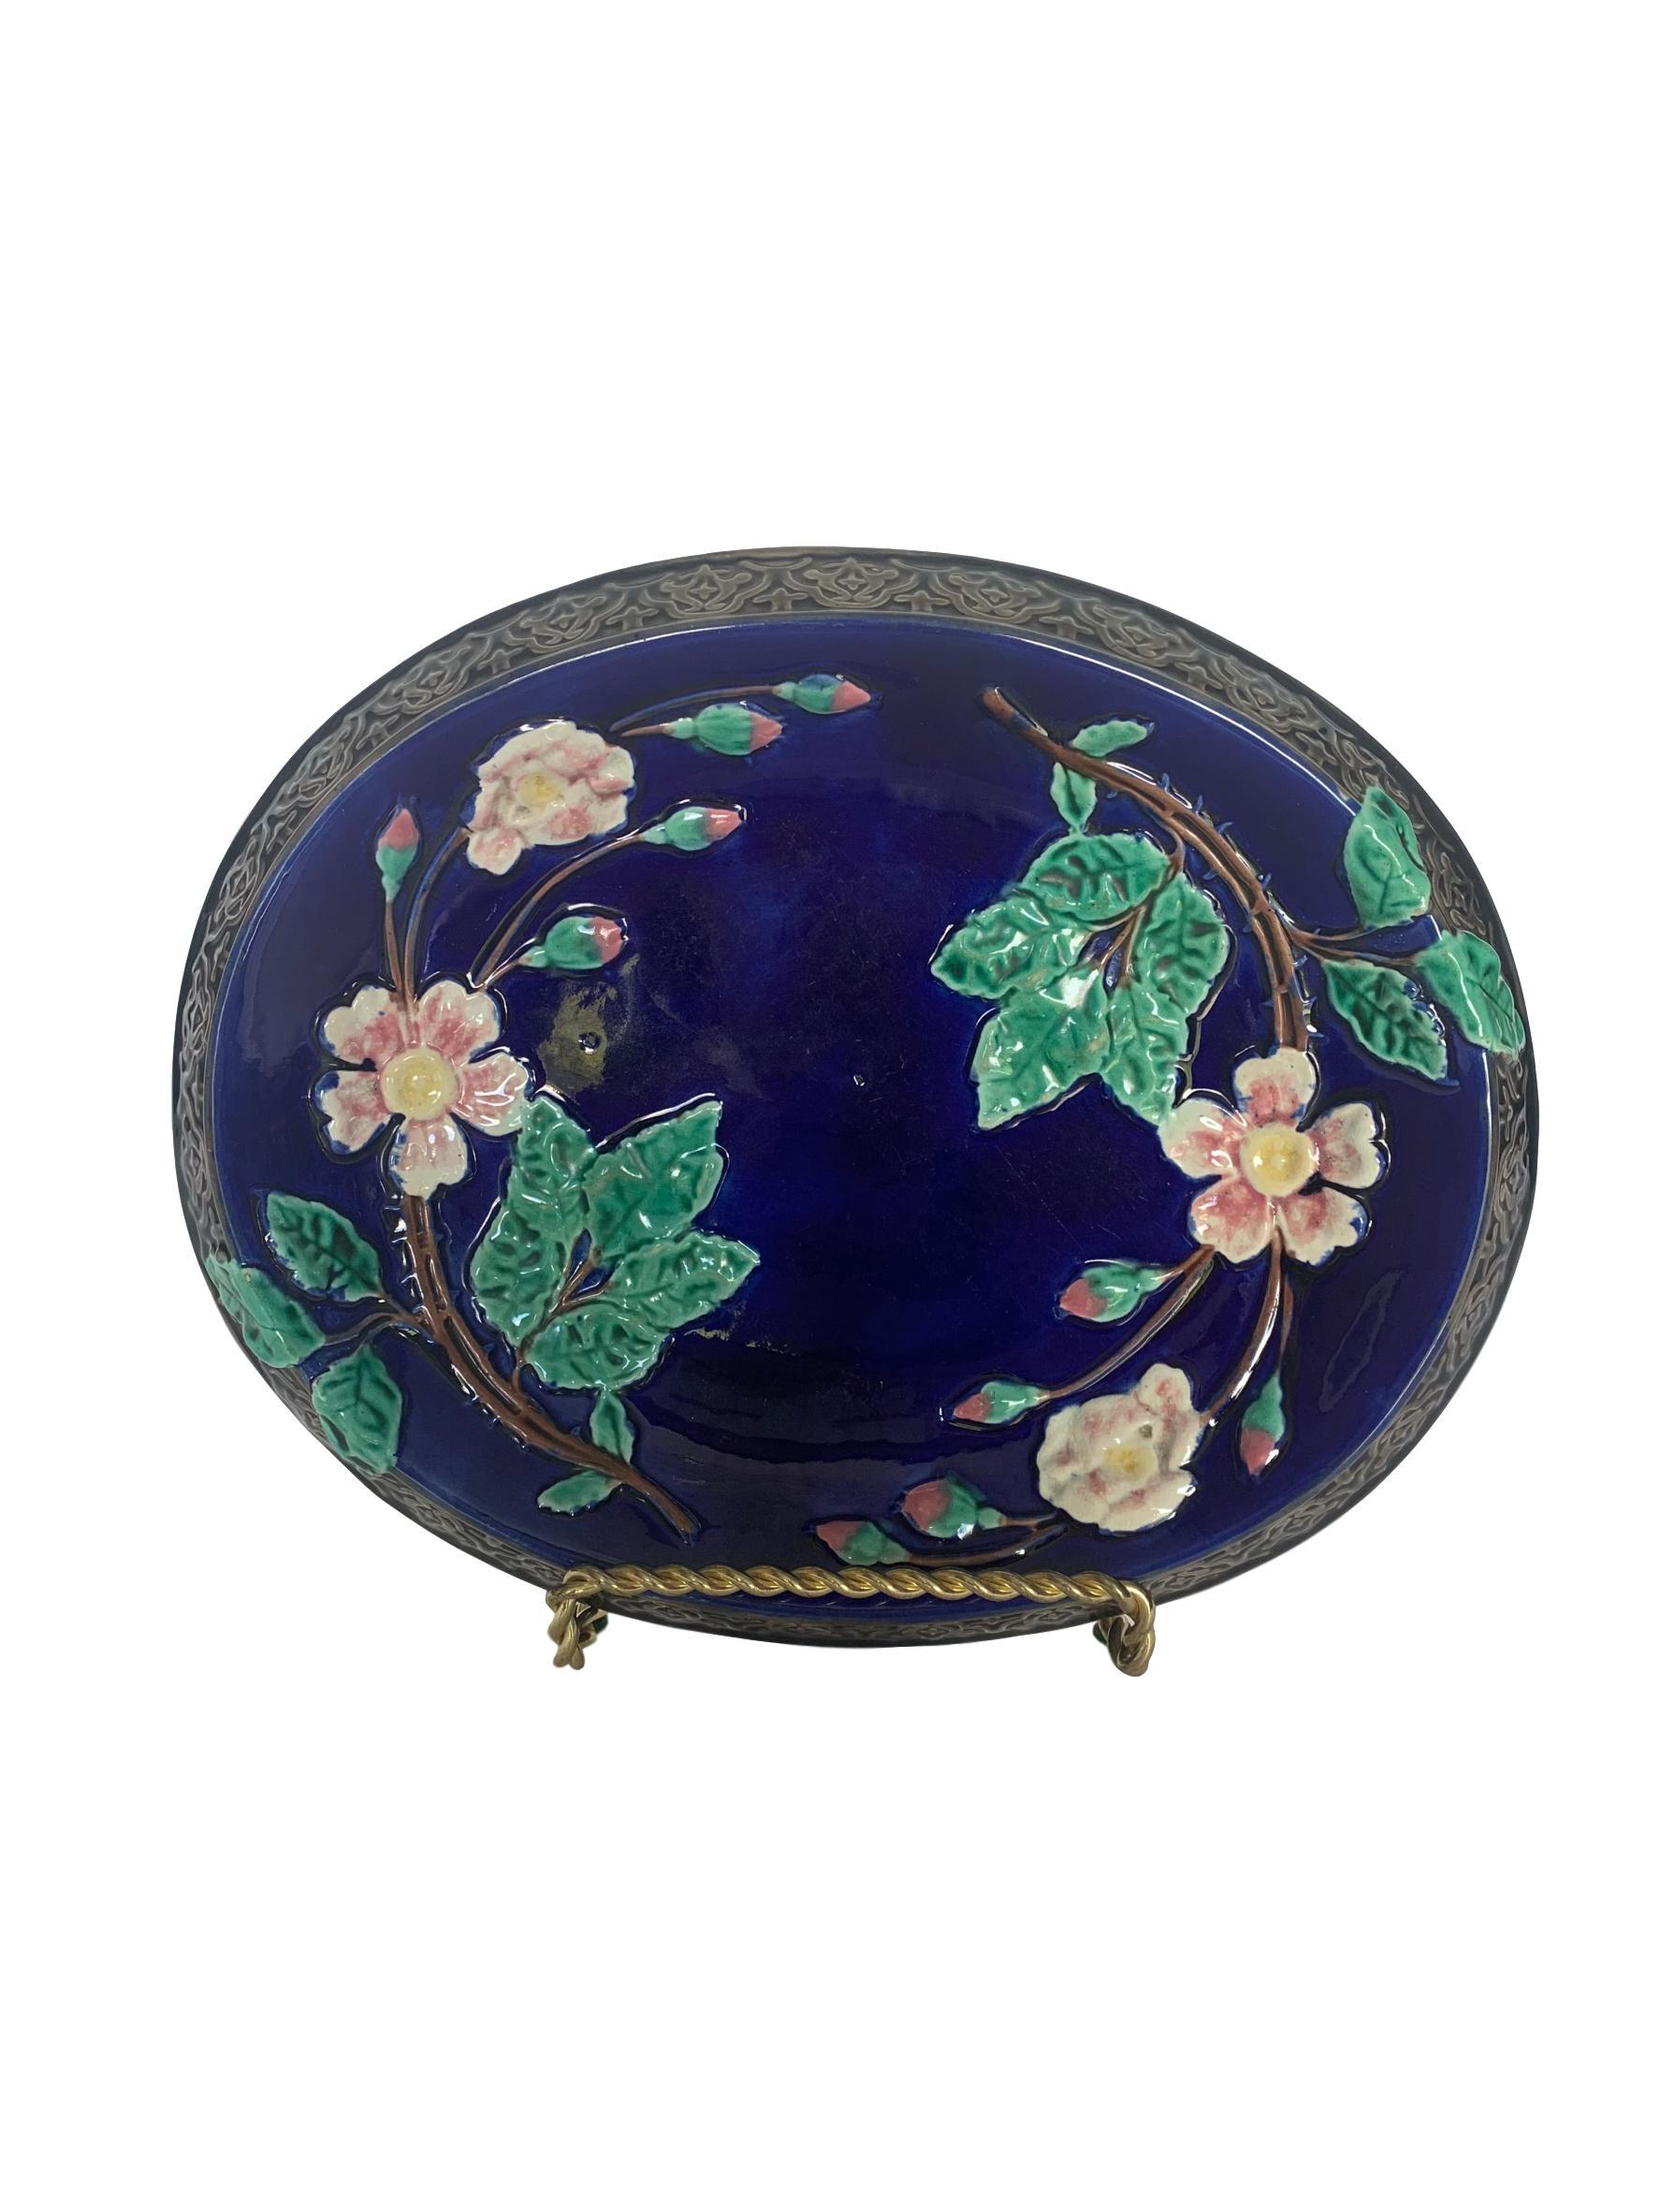 Antique Majolica cobalt wild rose bread tray, English, circa 1880 in highly desirable cobalt coloration, 13in.
For over 28 years we have been among the Nation’s preeminent specialists in fine antique majolica. 